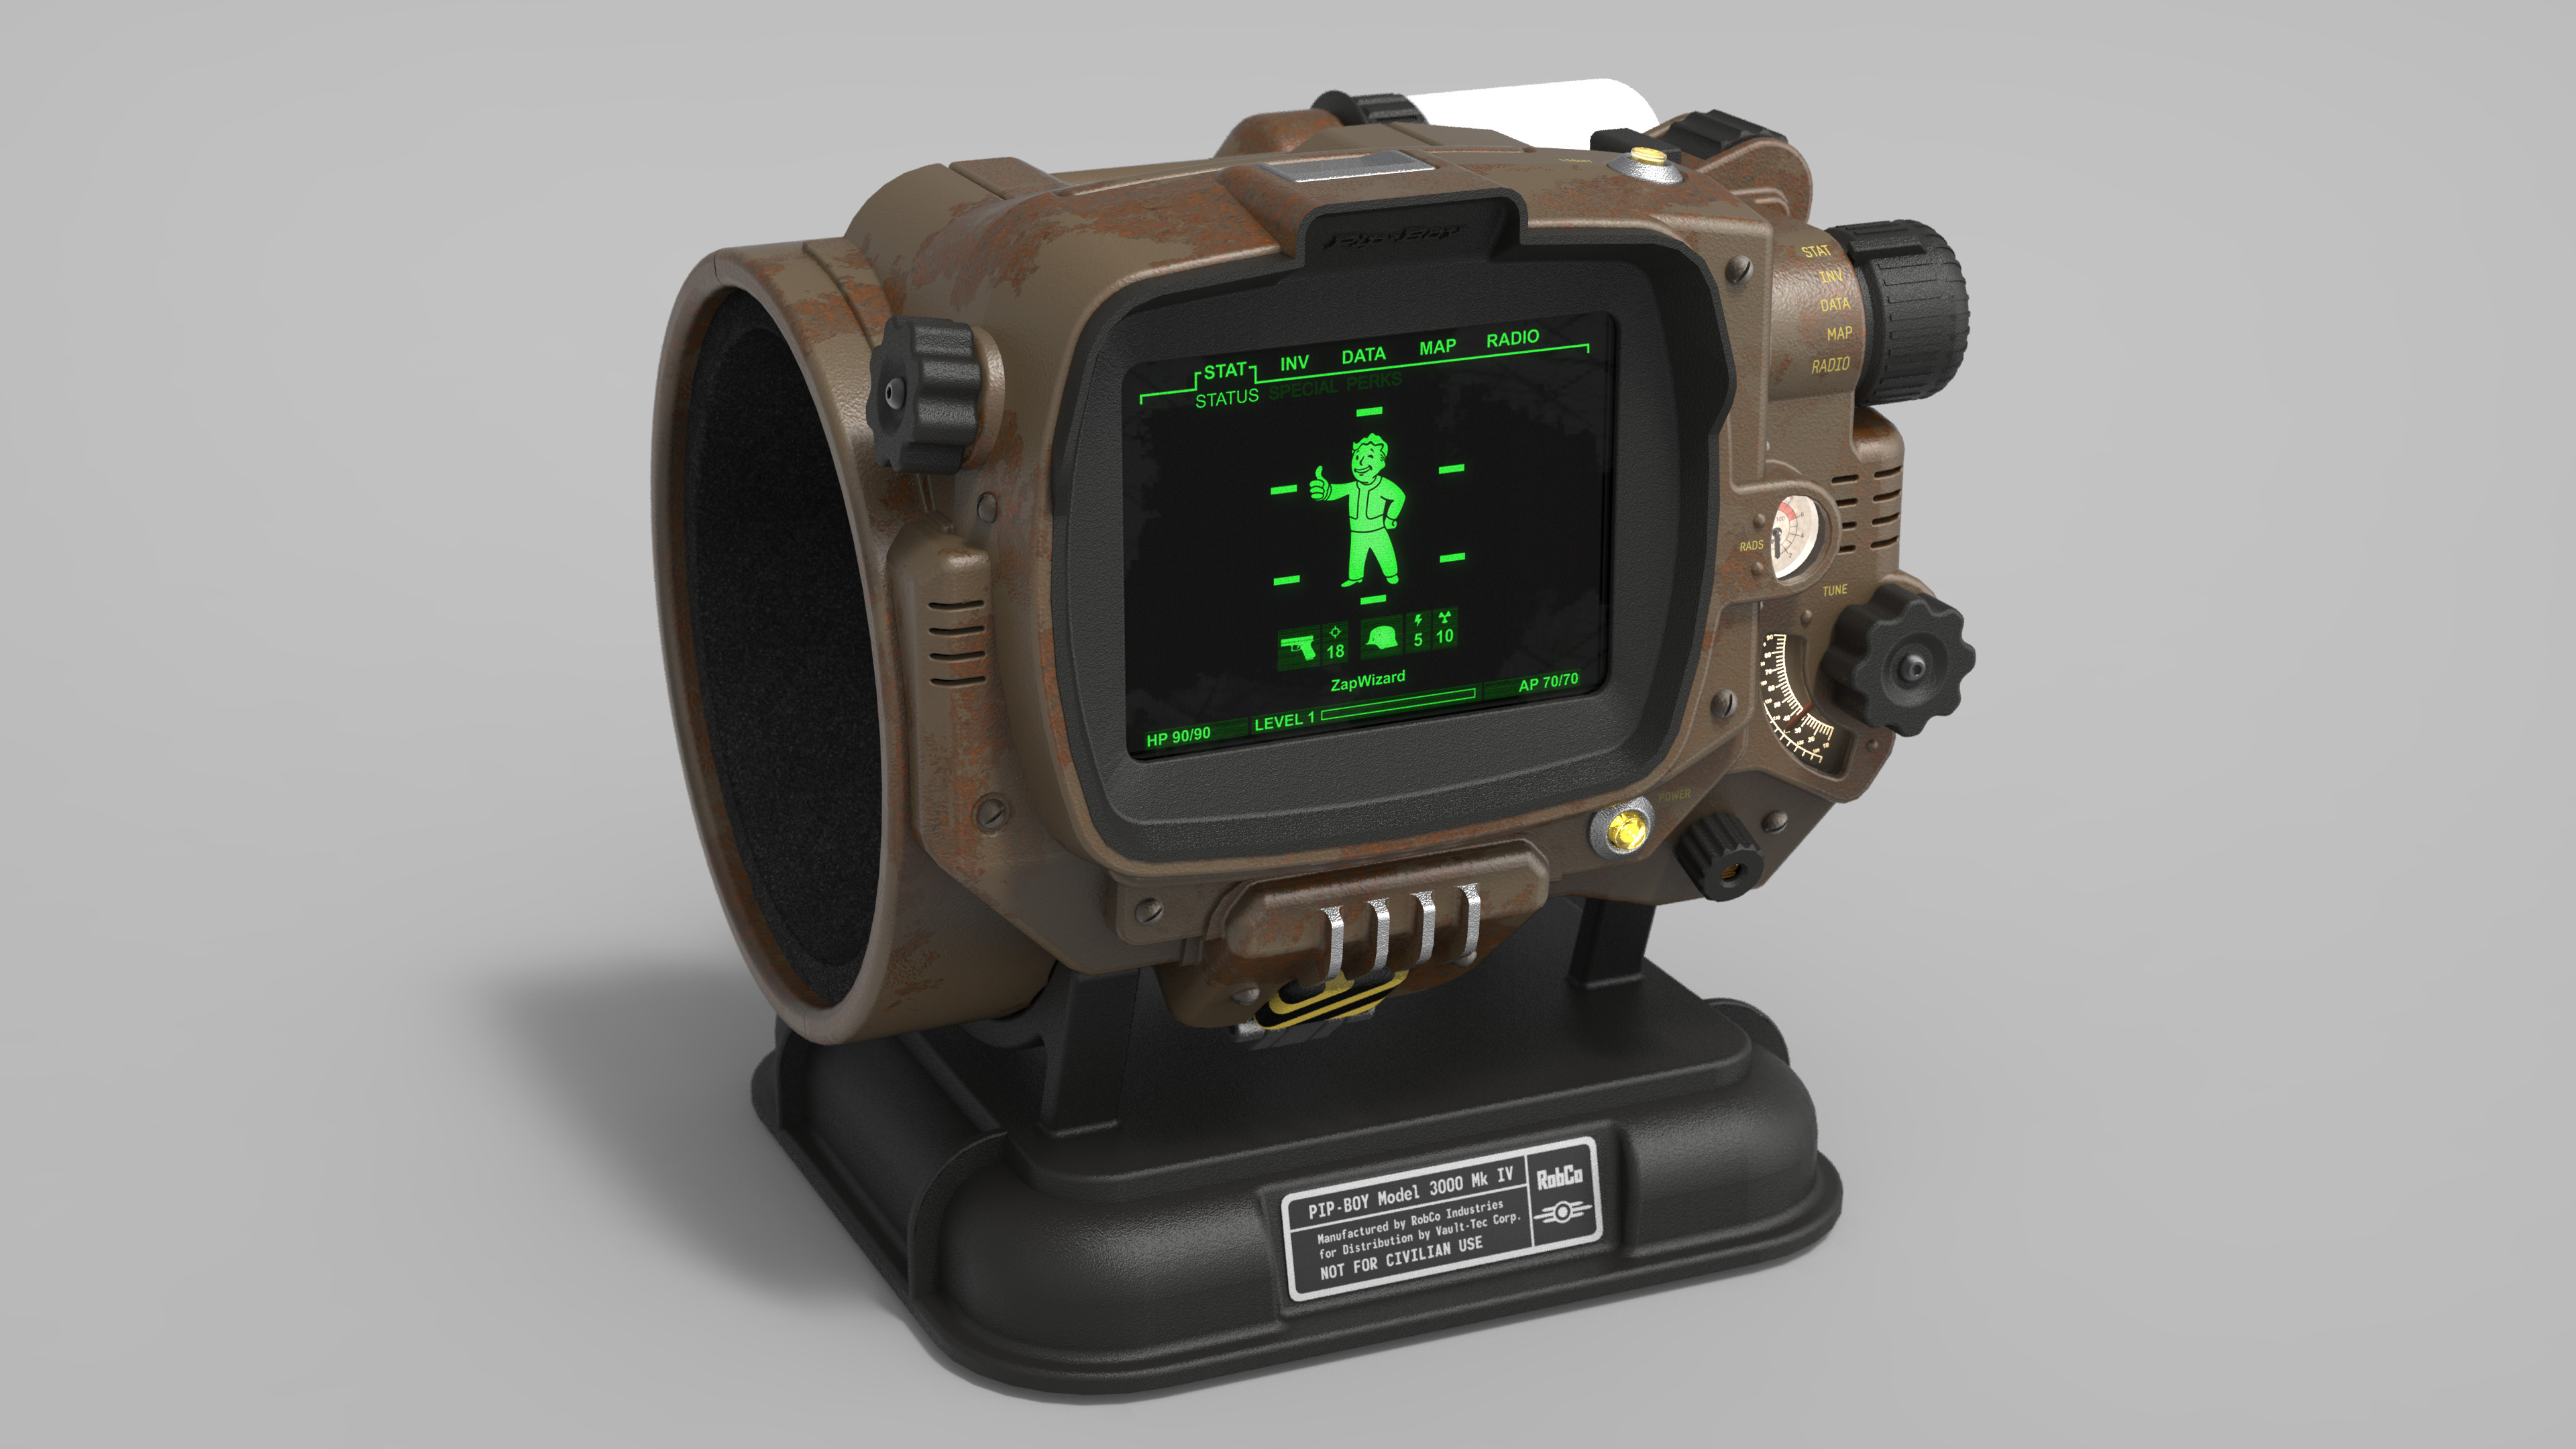 Functional Pip-boy 3000 Mk4 from Fallout 4 - Hackster.io